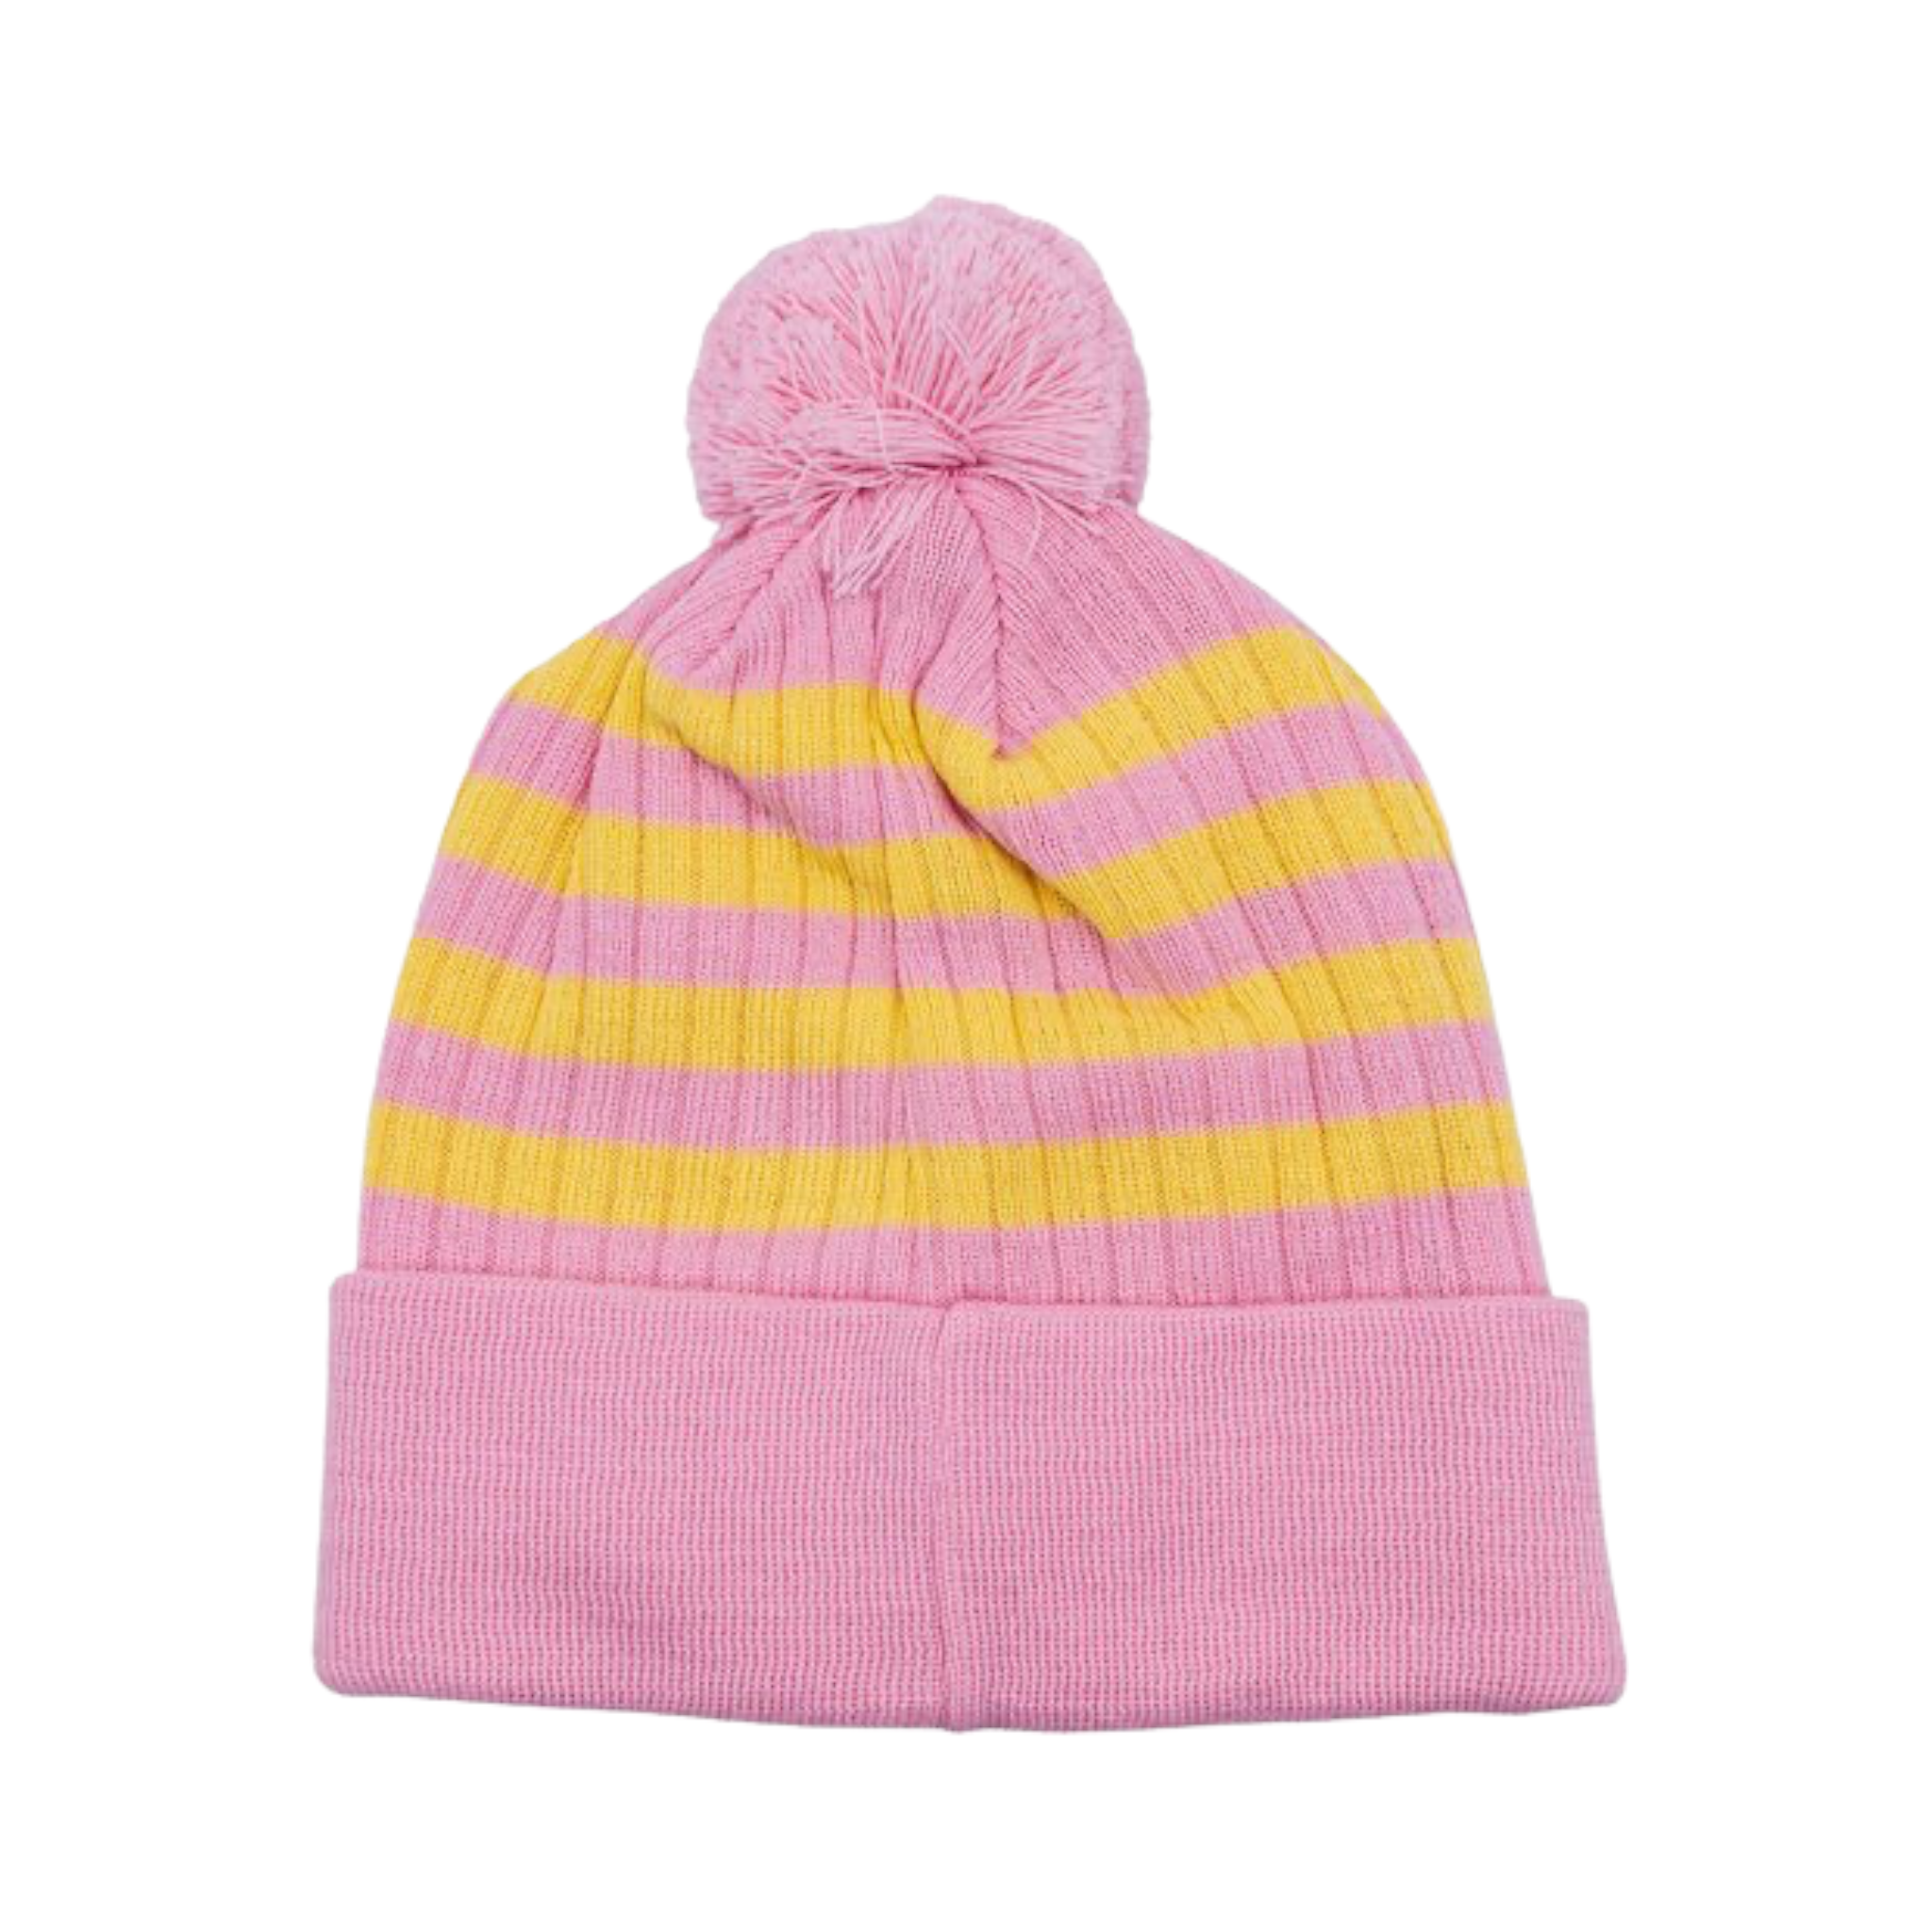 Striped Beannie Knit Pink- Liberal Youth Ministry